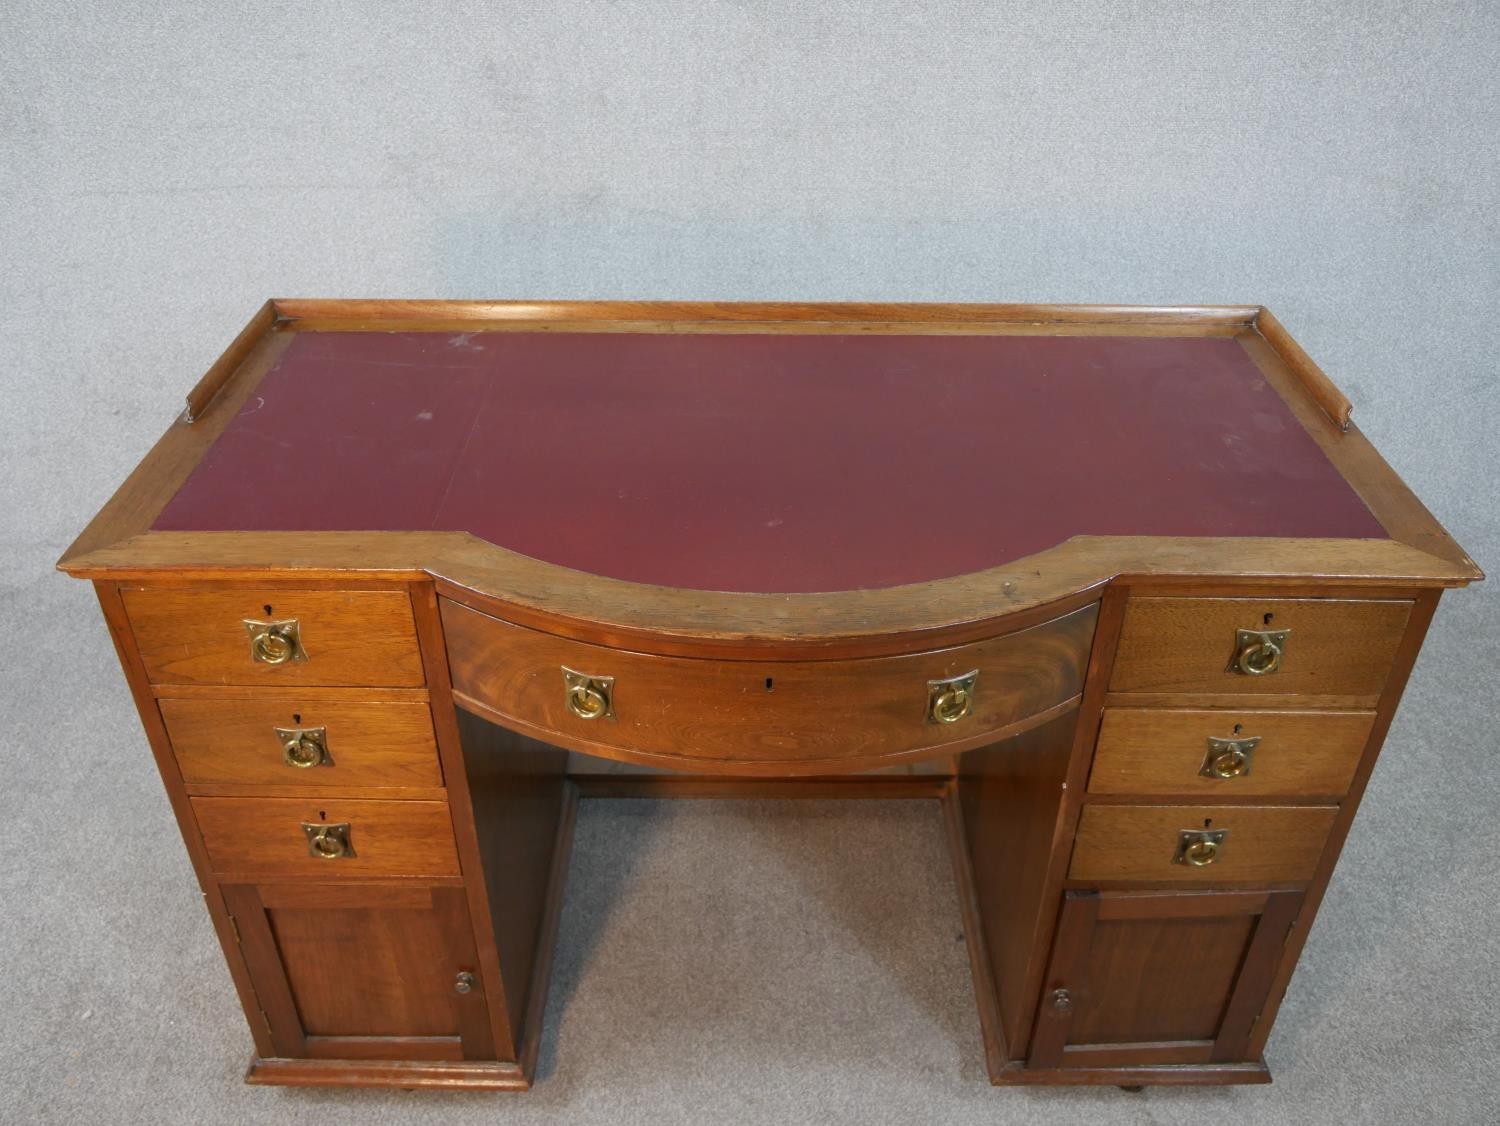 A late 19th century mahogany pedestal desk with bowfronted centre section above drawers and - Image 3 of 5